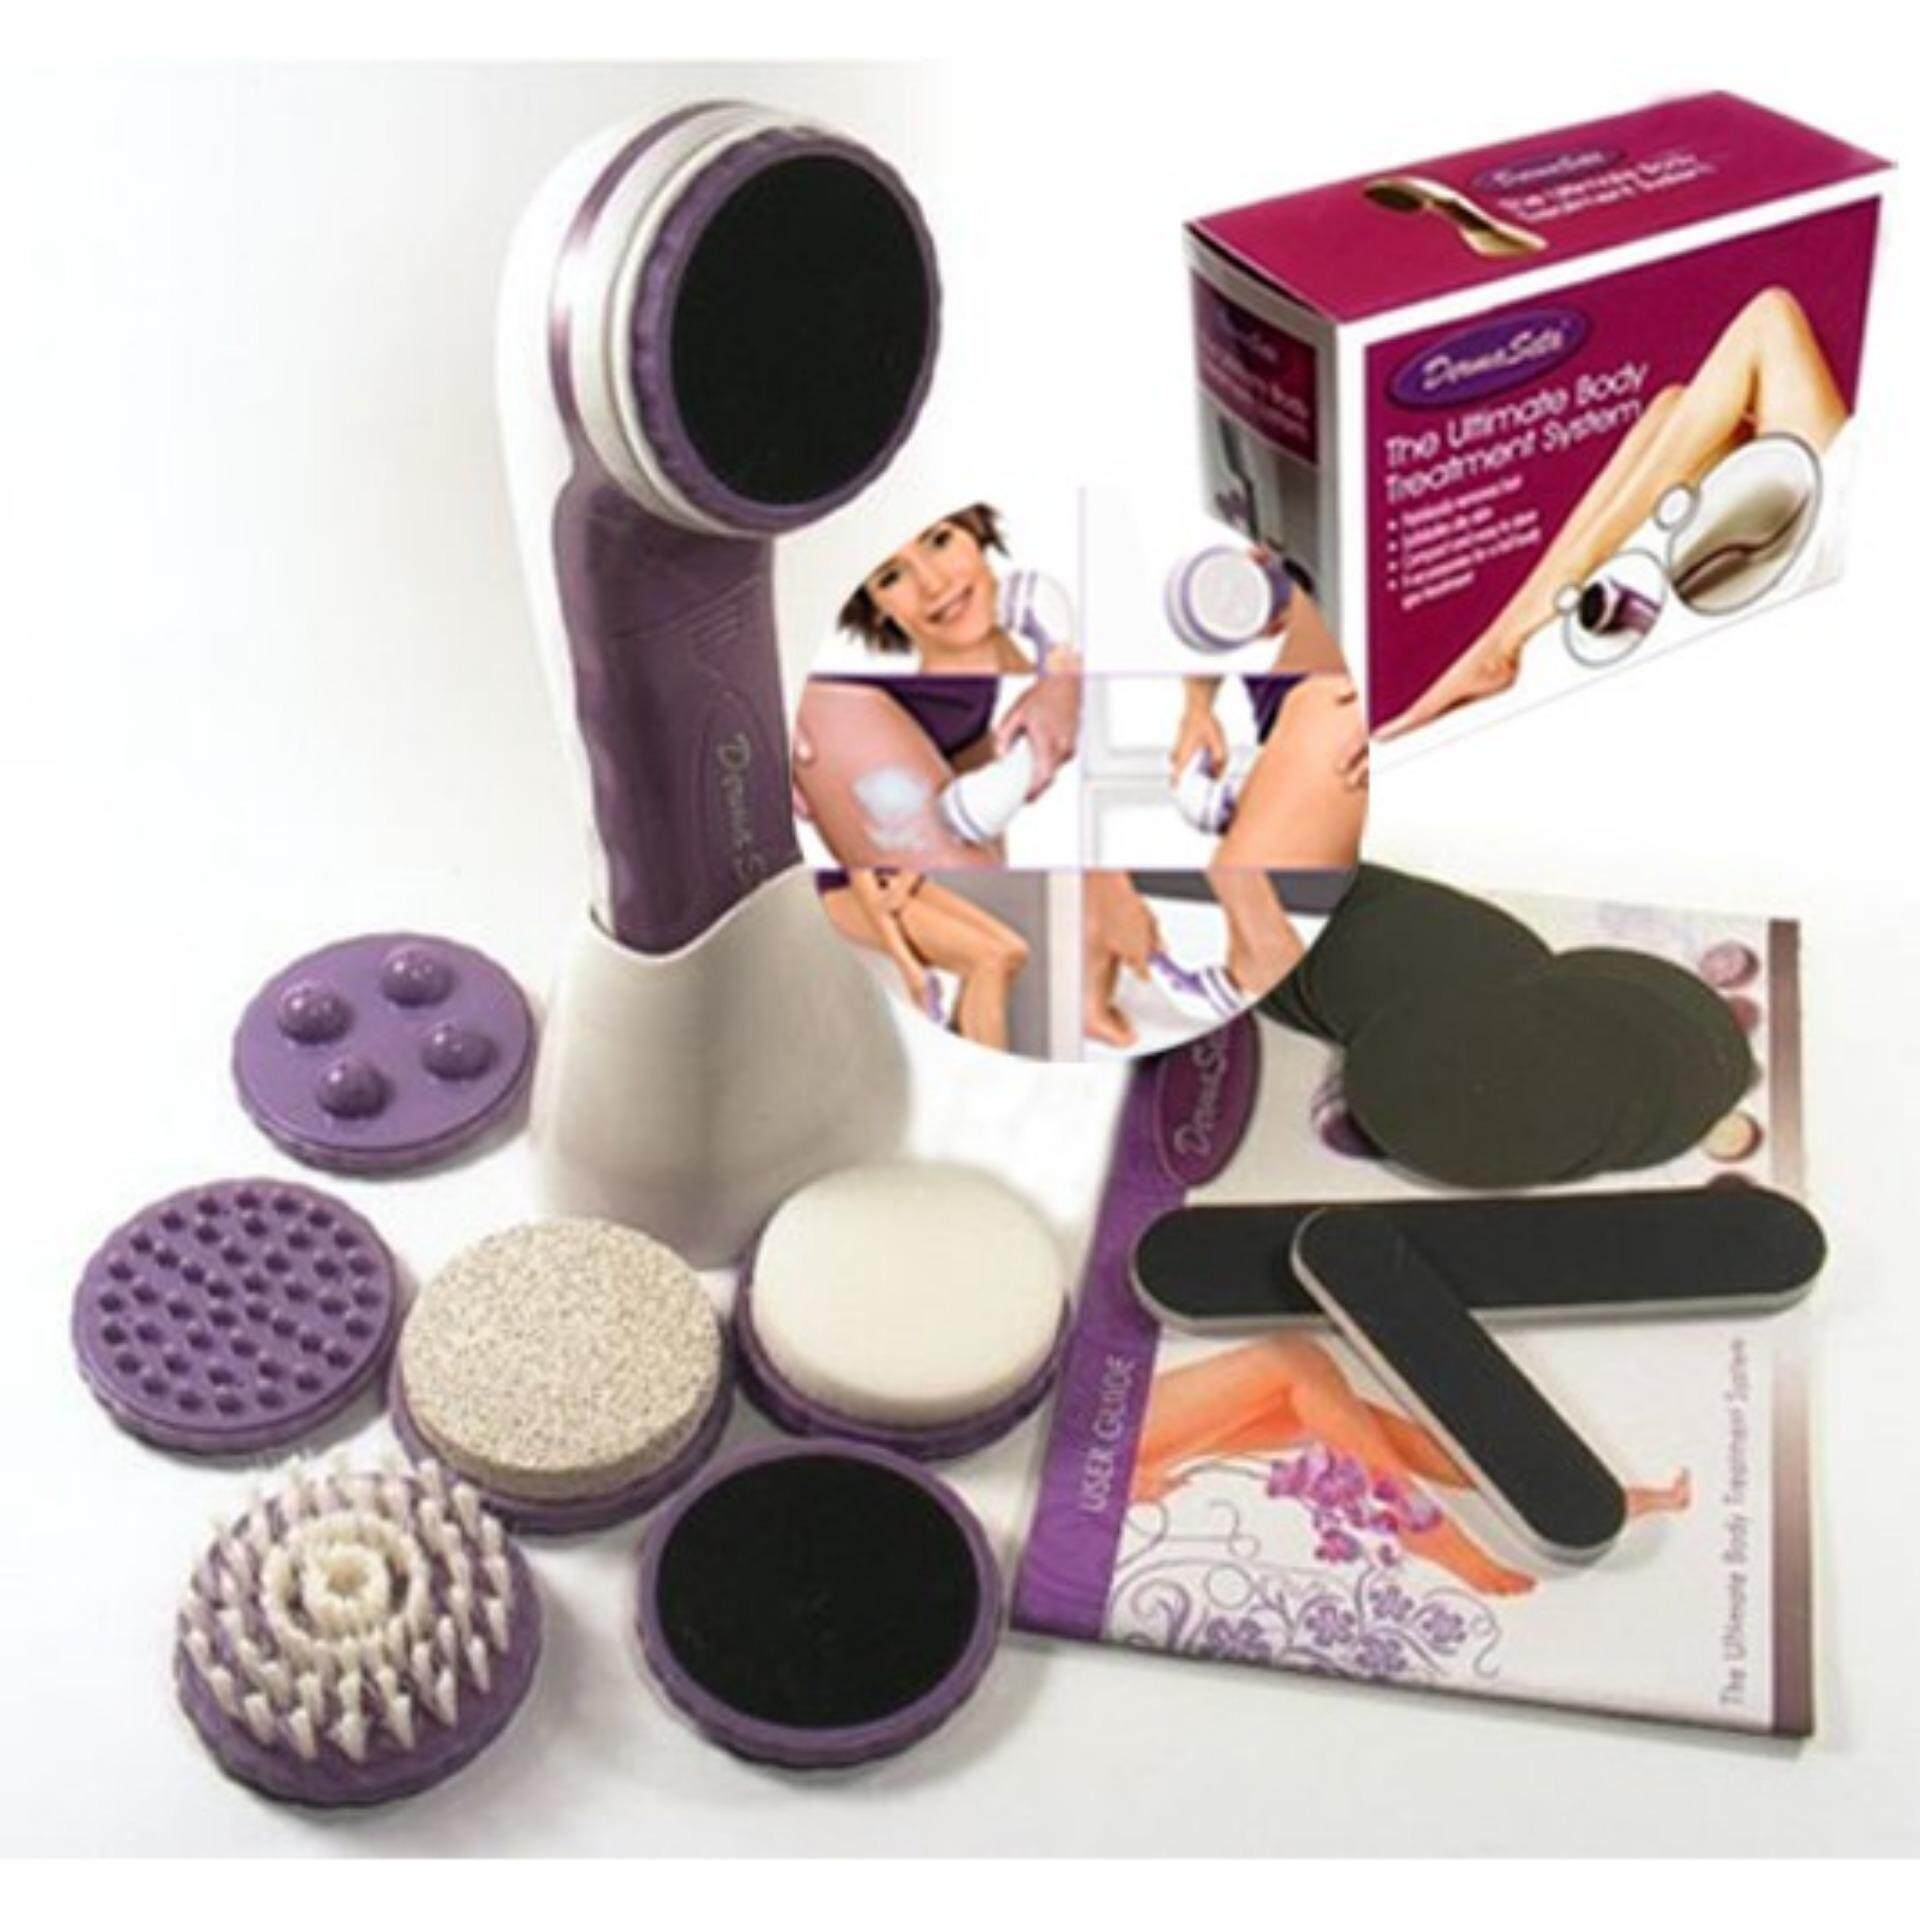 The Ultimate Body Treatment System